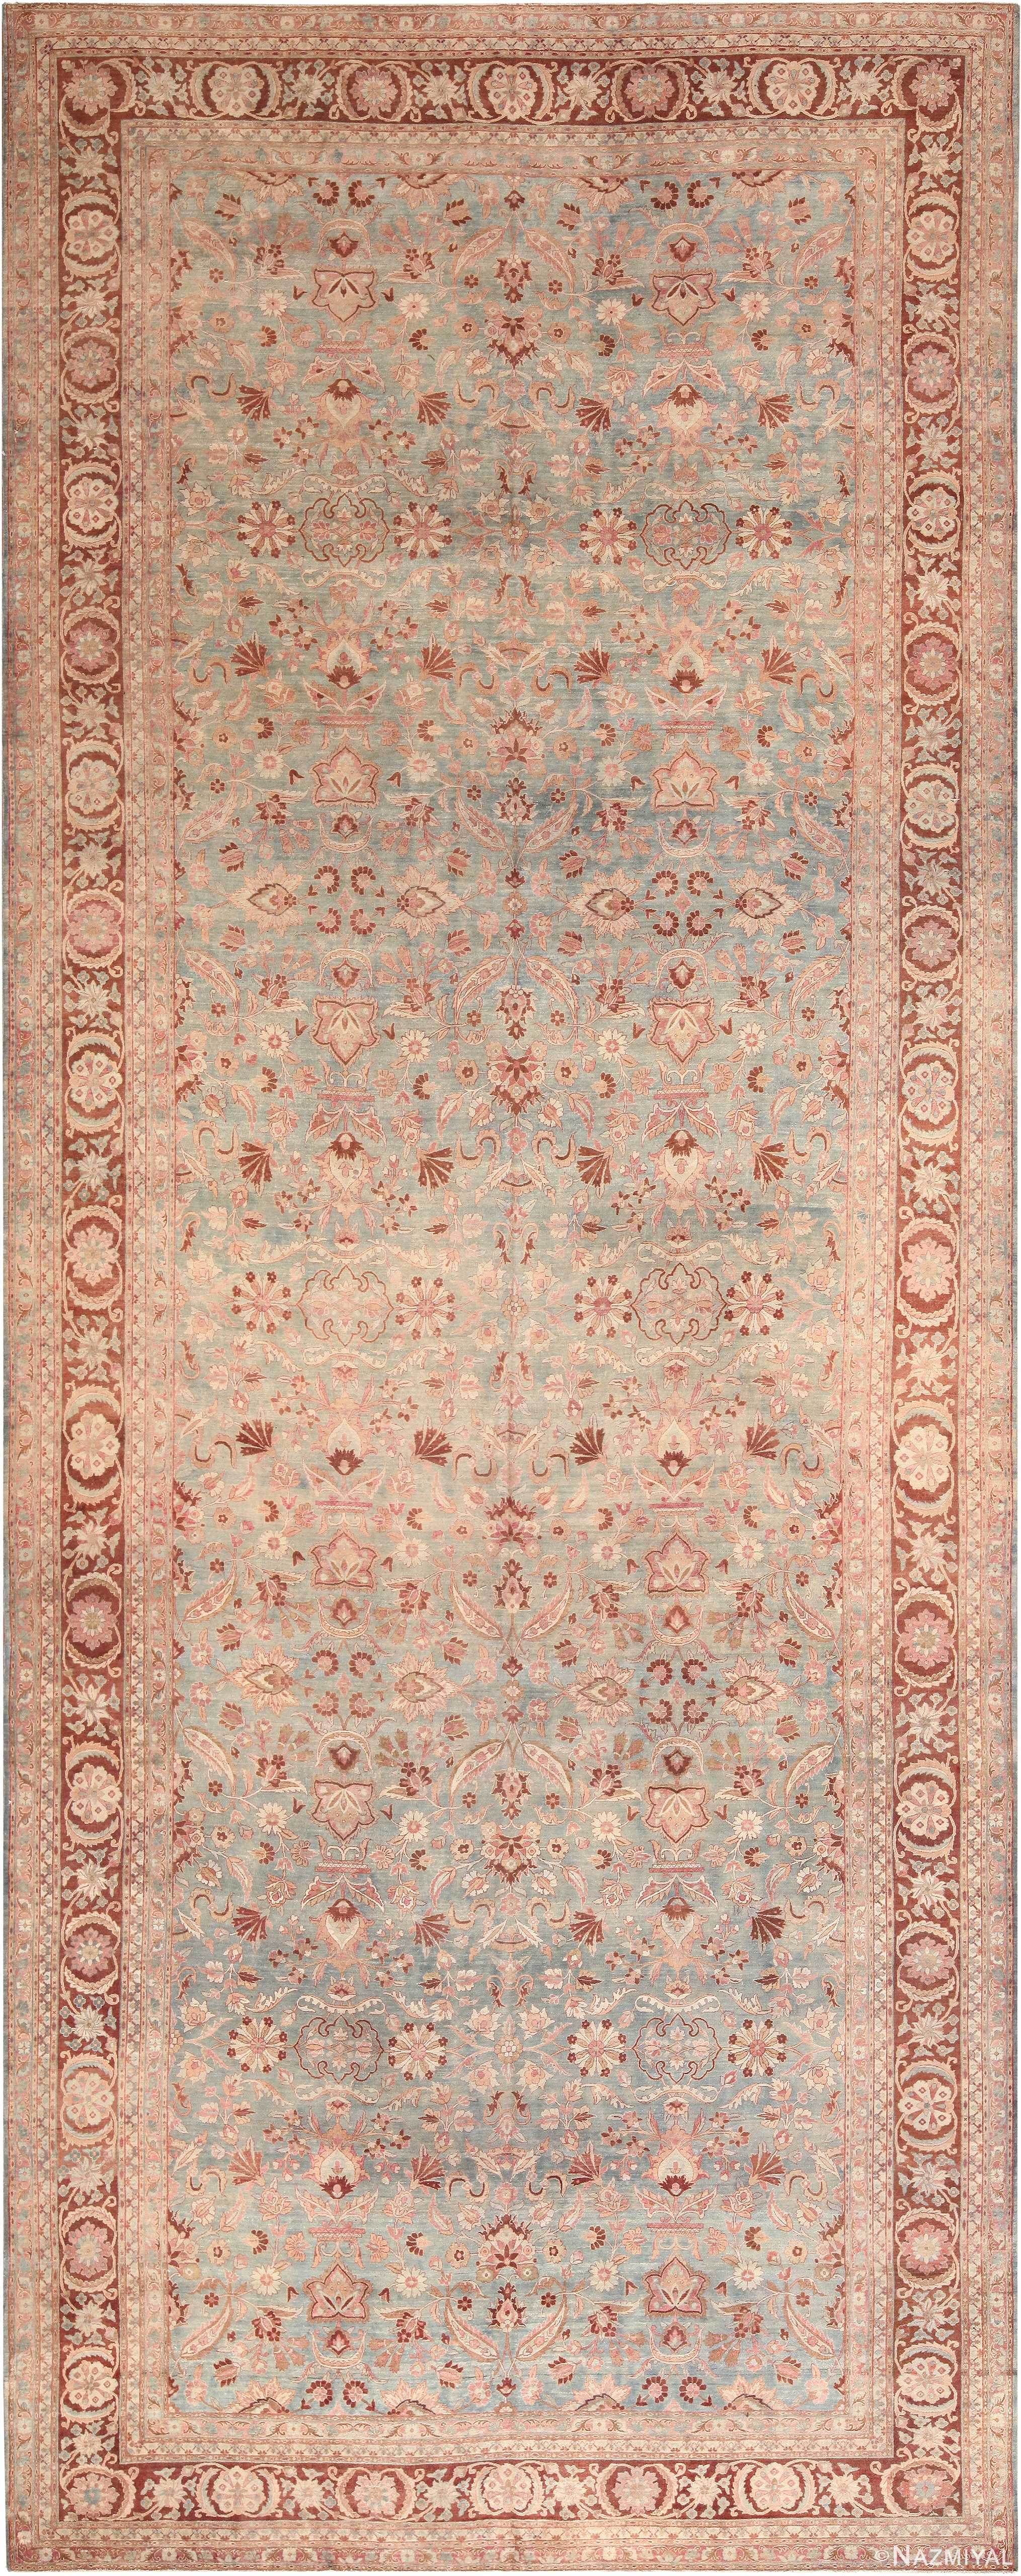 Oversized Light Blue Background Antique Persian Kerman Rug 71048 by Nazmiyal Antique Rugs